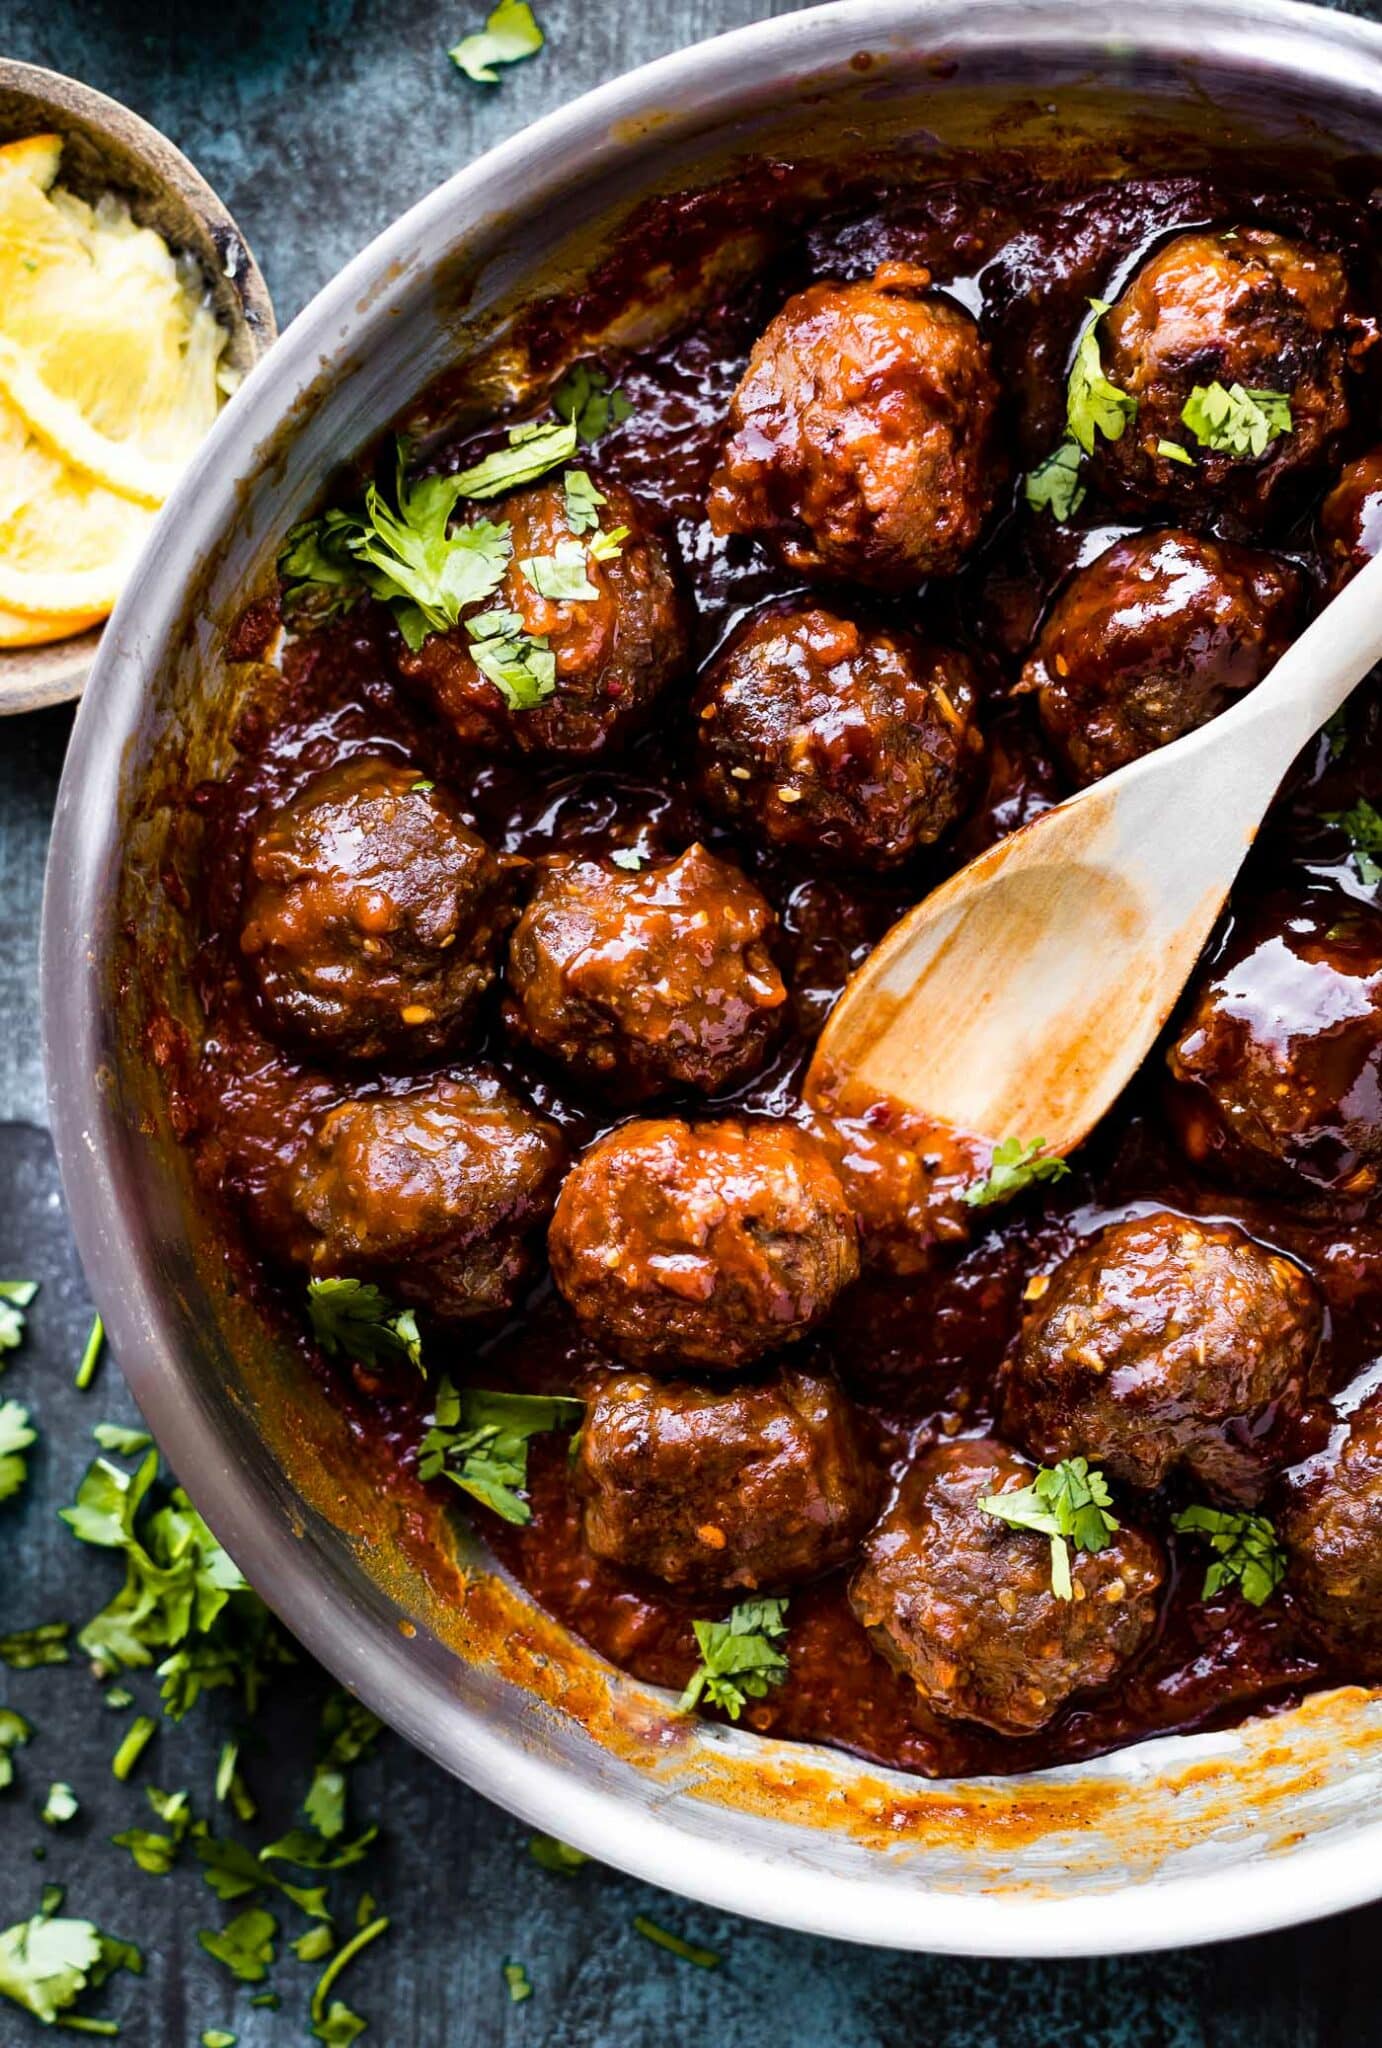 Overhead view saucy 5 Spice BBQ Meatballs in skillet with wooden spoon scooping one a meatball